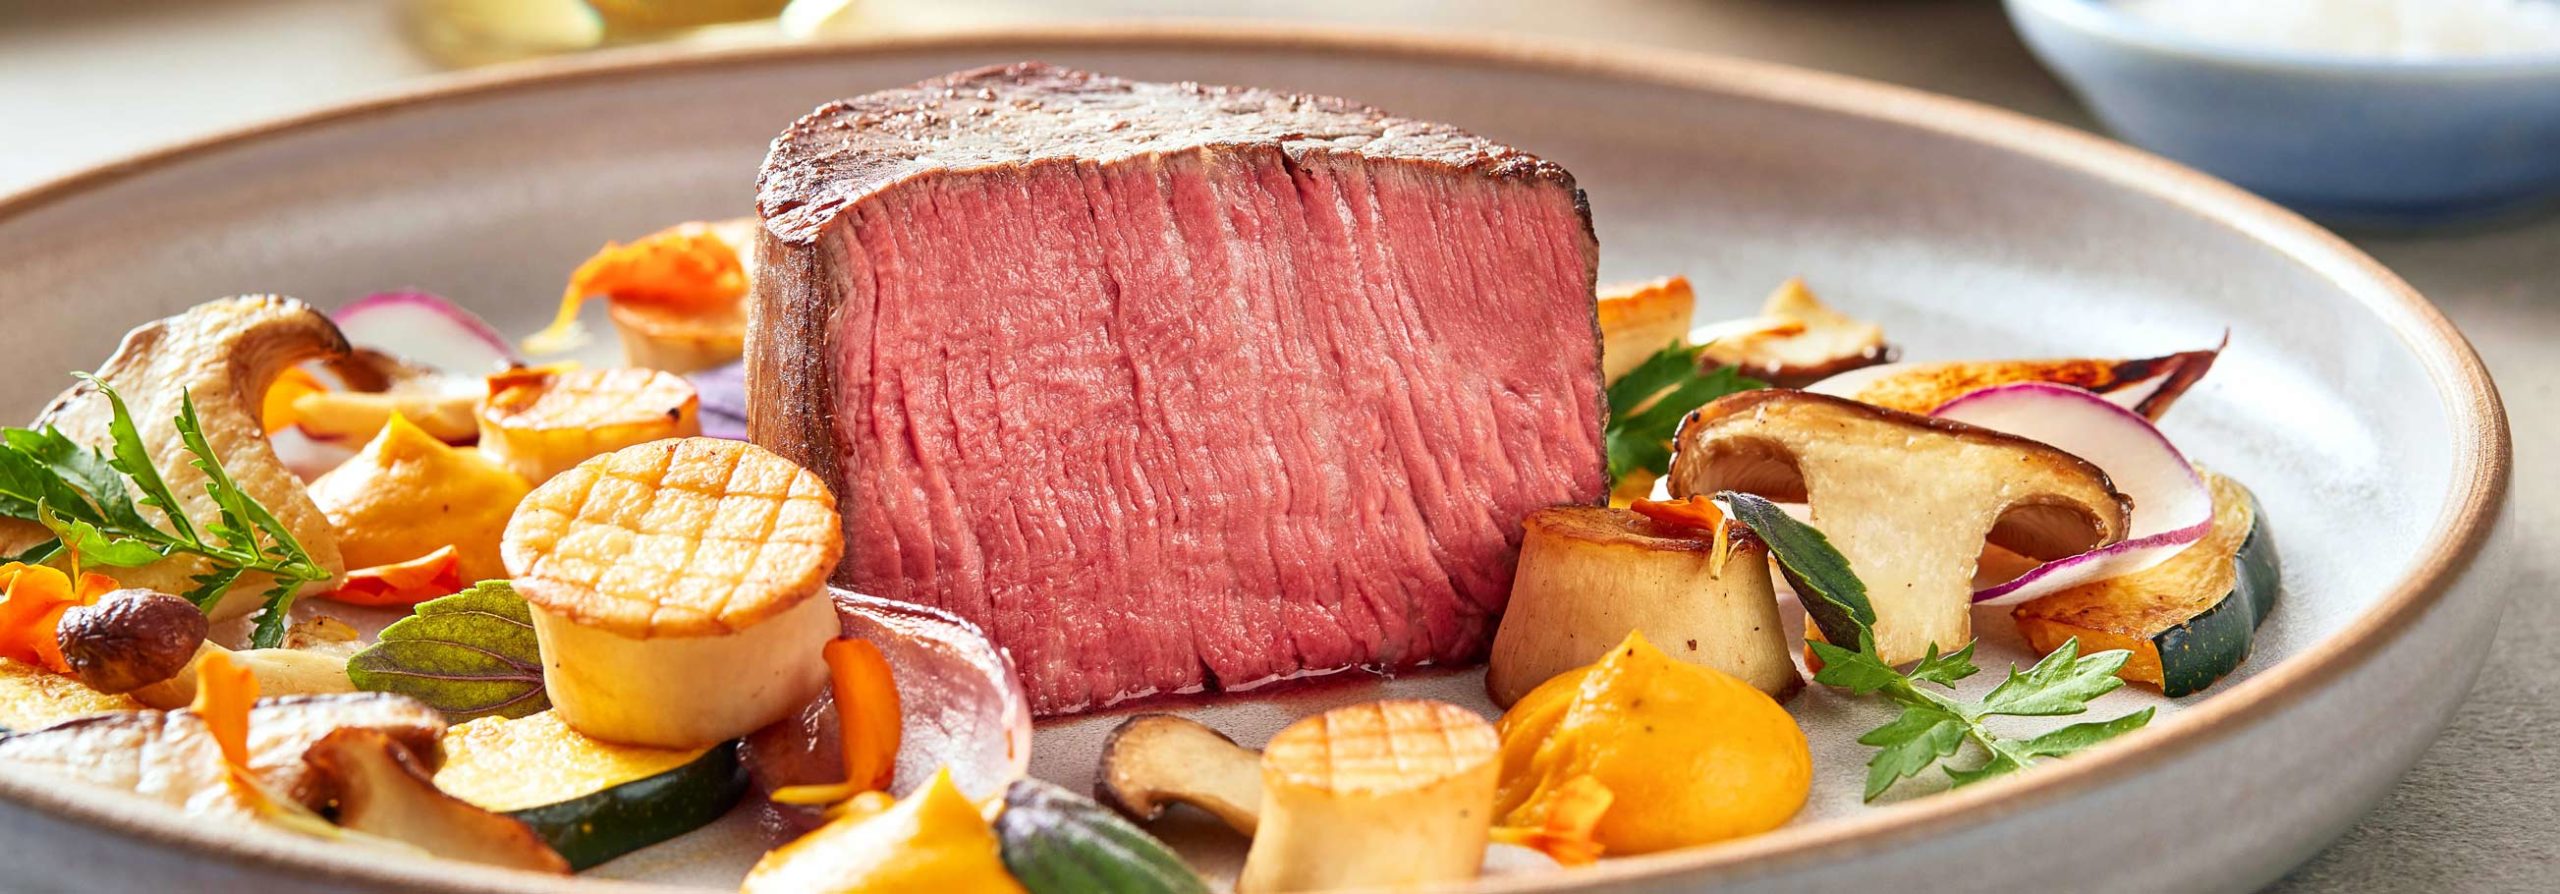 Rare steak cut with roasted vegetables